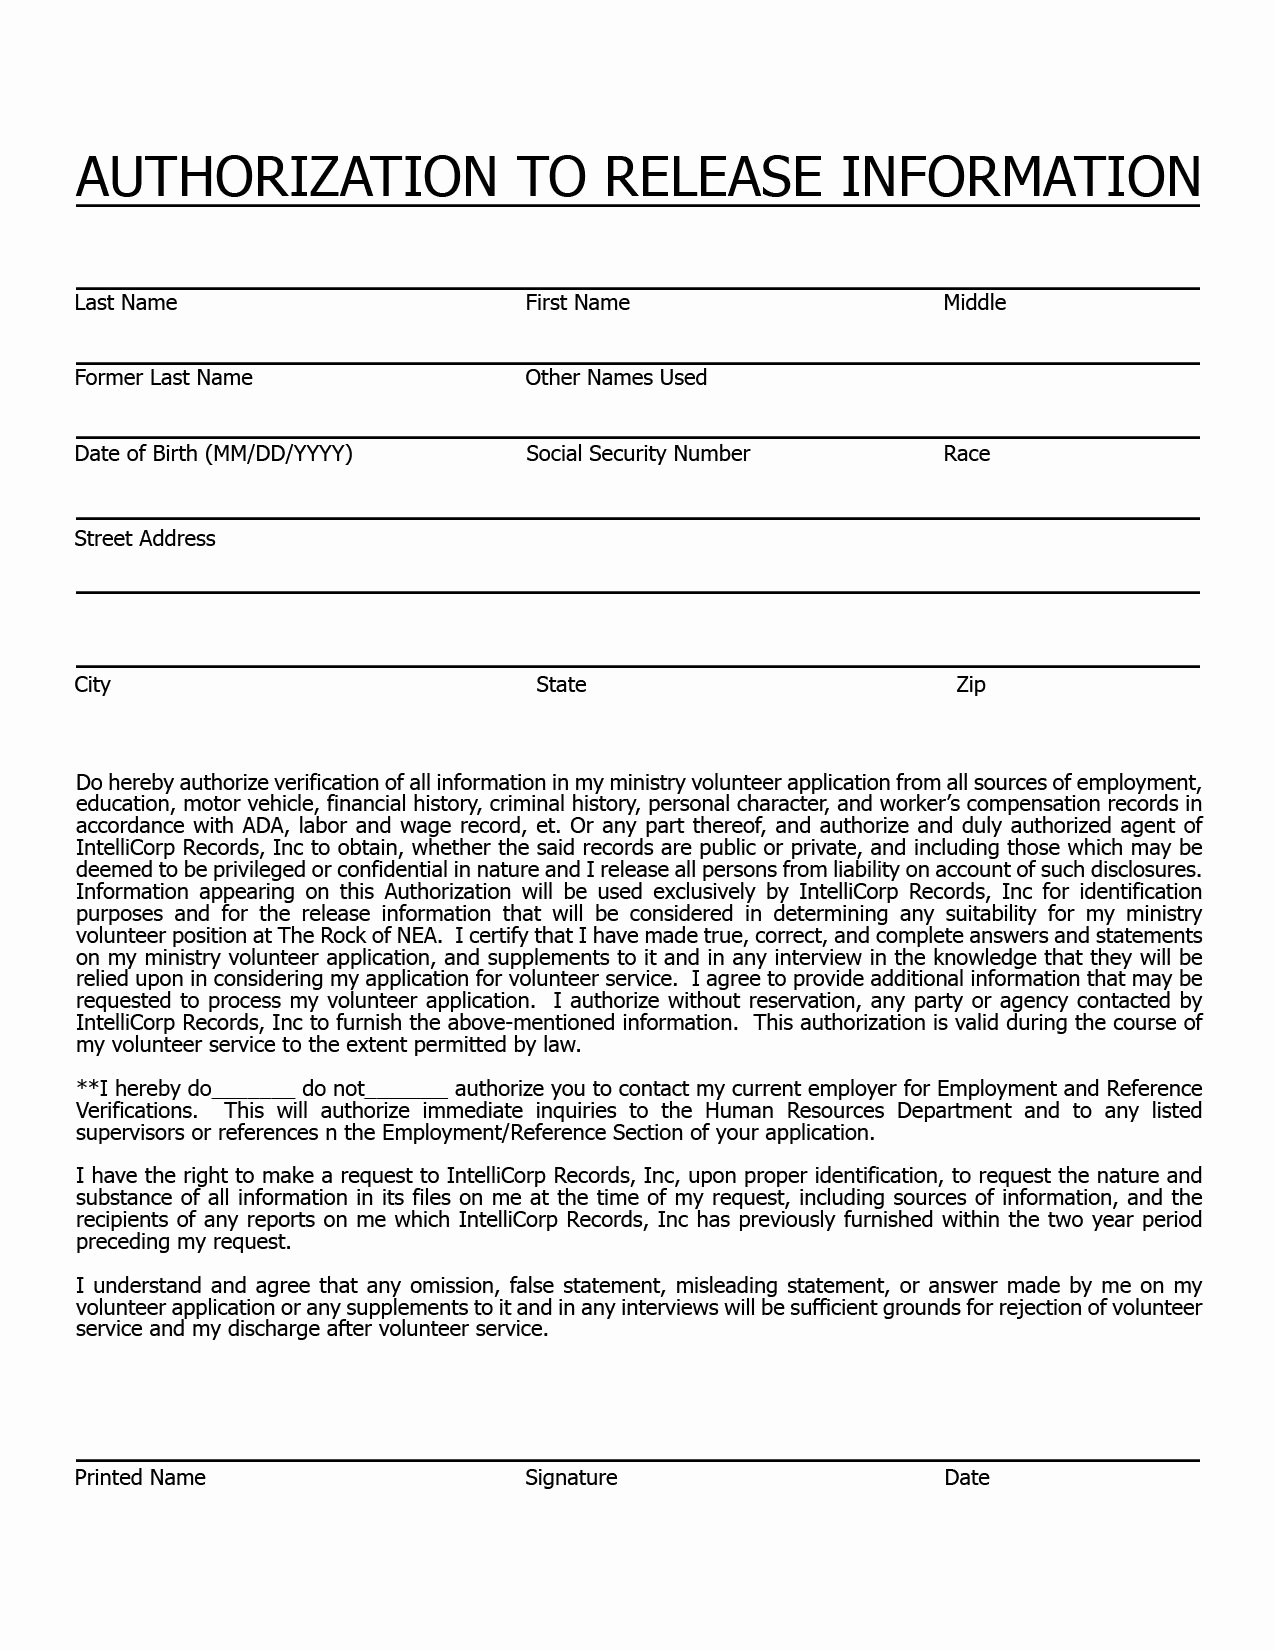 Background Check form Template Free New Church Nursery Background Check form